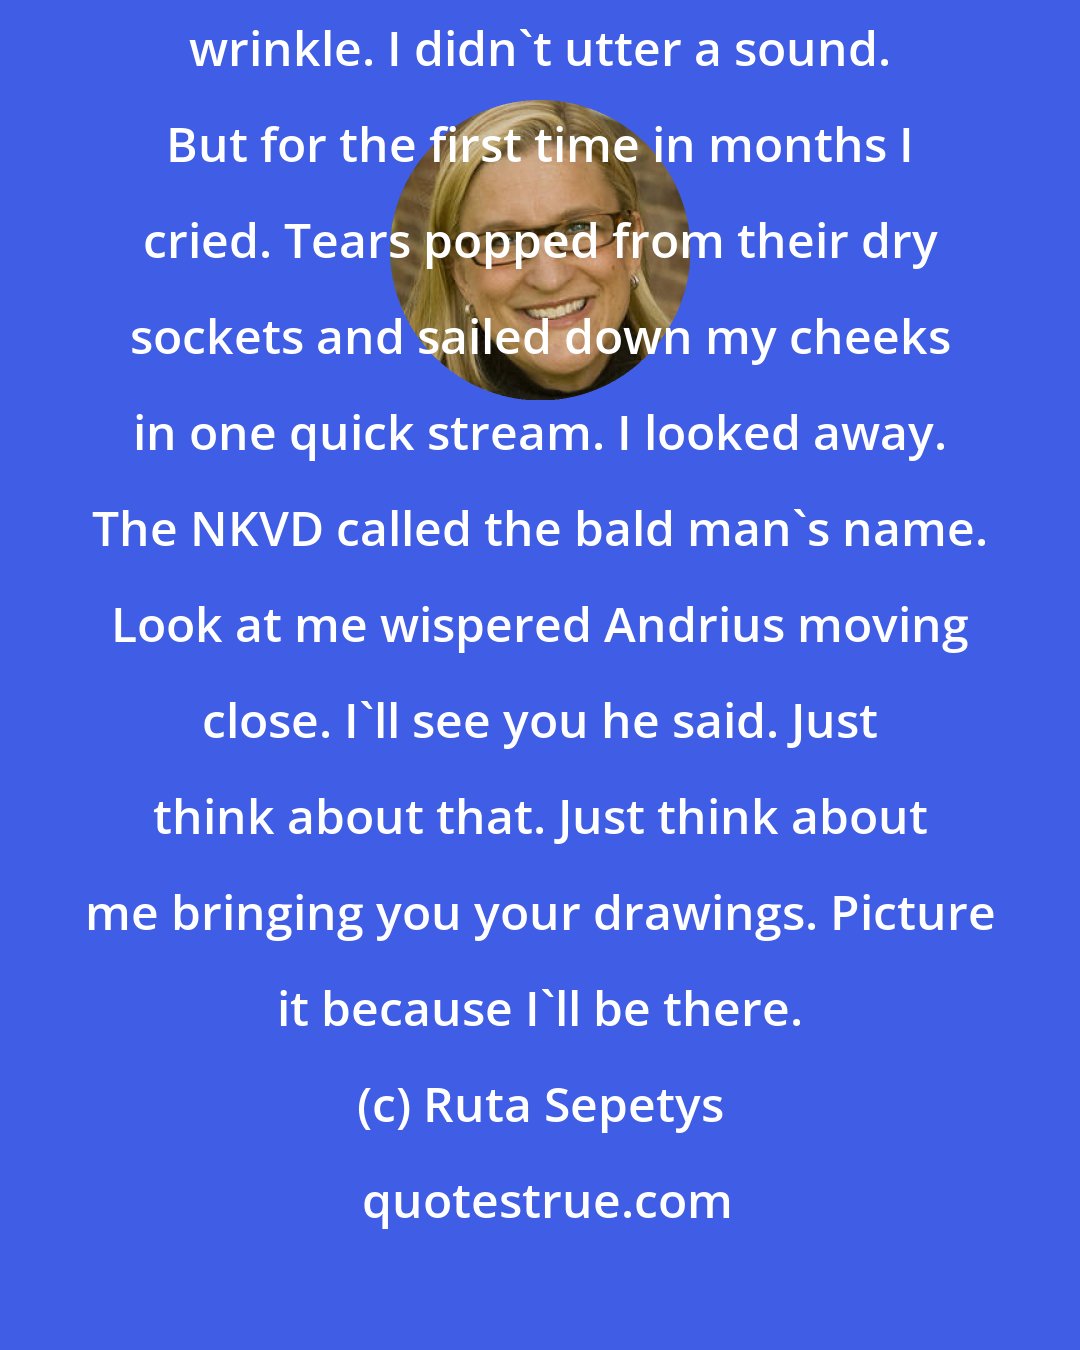 Ruta Sepetys: Andrius turned. His eyes found mine. I'll see you he said. My face didn't wrinkle. I didn't utter a sound. But for the first time in months I cried. Tears popped from their dry sockets and sailed down my cheeks in one quick stream. I looked away. The NKVD called the bald man's name. Look at me wispered Andrius moving close. I'll see you he said. Just think about that. Just think about me bringing you your drawings. Picture it because I'll be there.